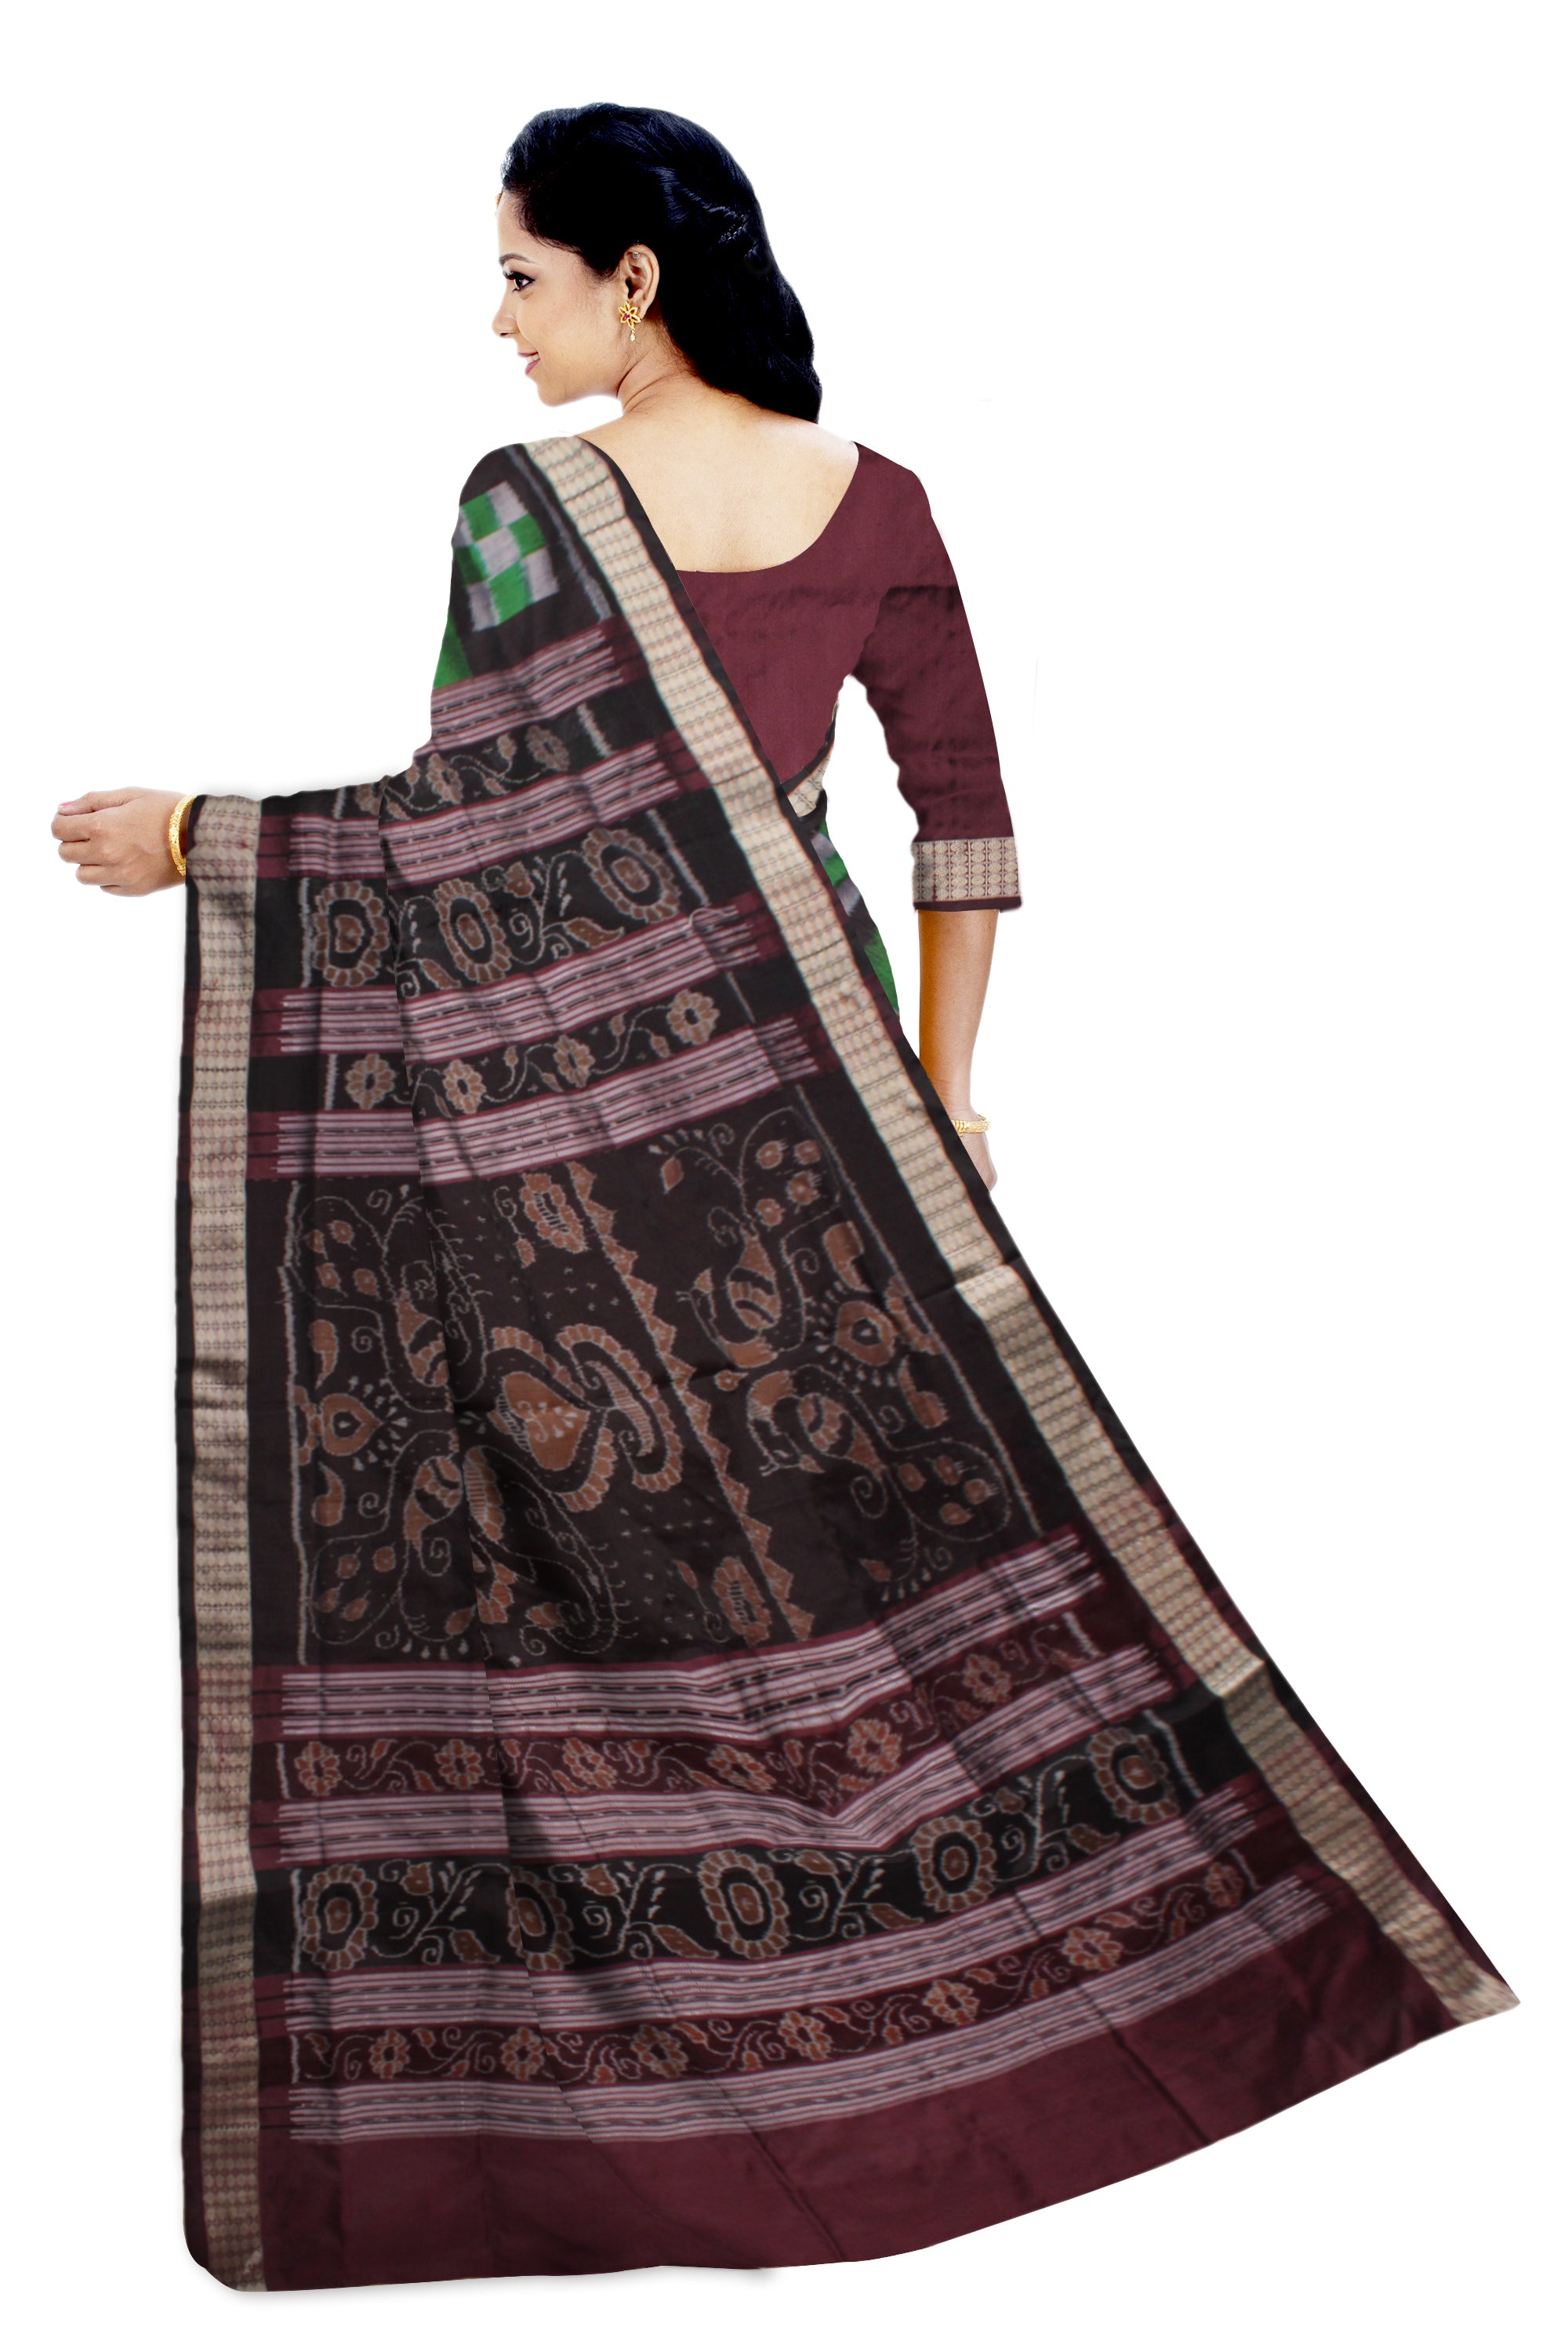 TRADITIONAL PASAPALI WITH PEACOCK PRINT BOMKEI PATA SAREE IS GREEN,WHITE AND COFFEE COLOR BASE,AVAILABLE WITH MATCHING BLOUSE PIECE. - Koshali Arts & Crafts Enterprise